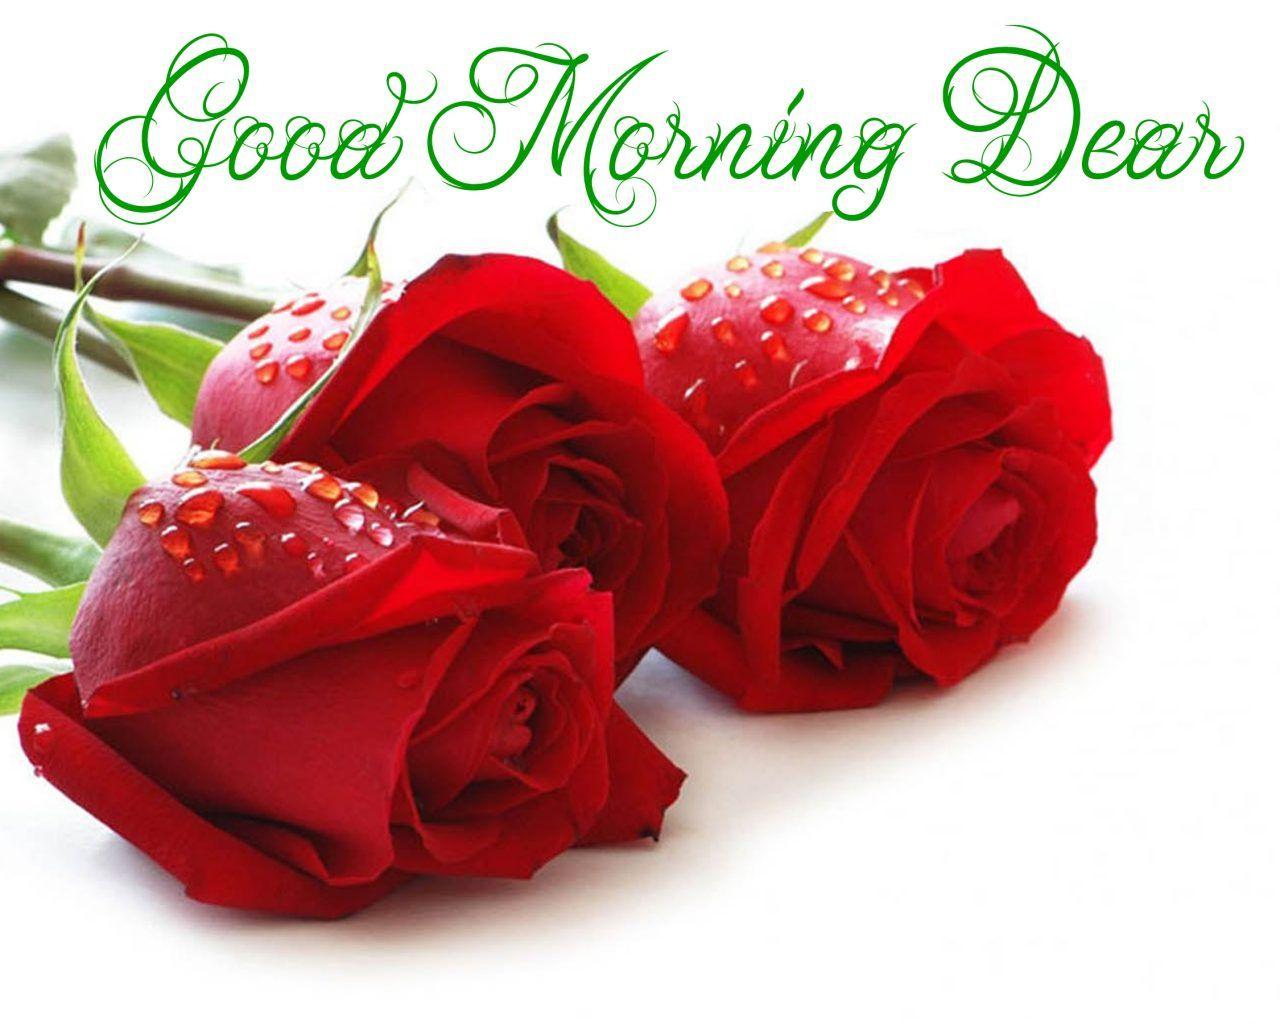 Good Morning Dear Red Roses With Water Droplets, Wallpaper13.com